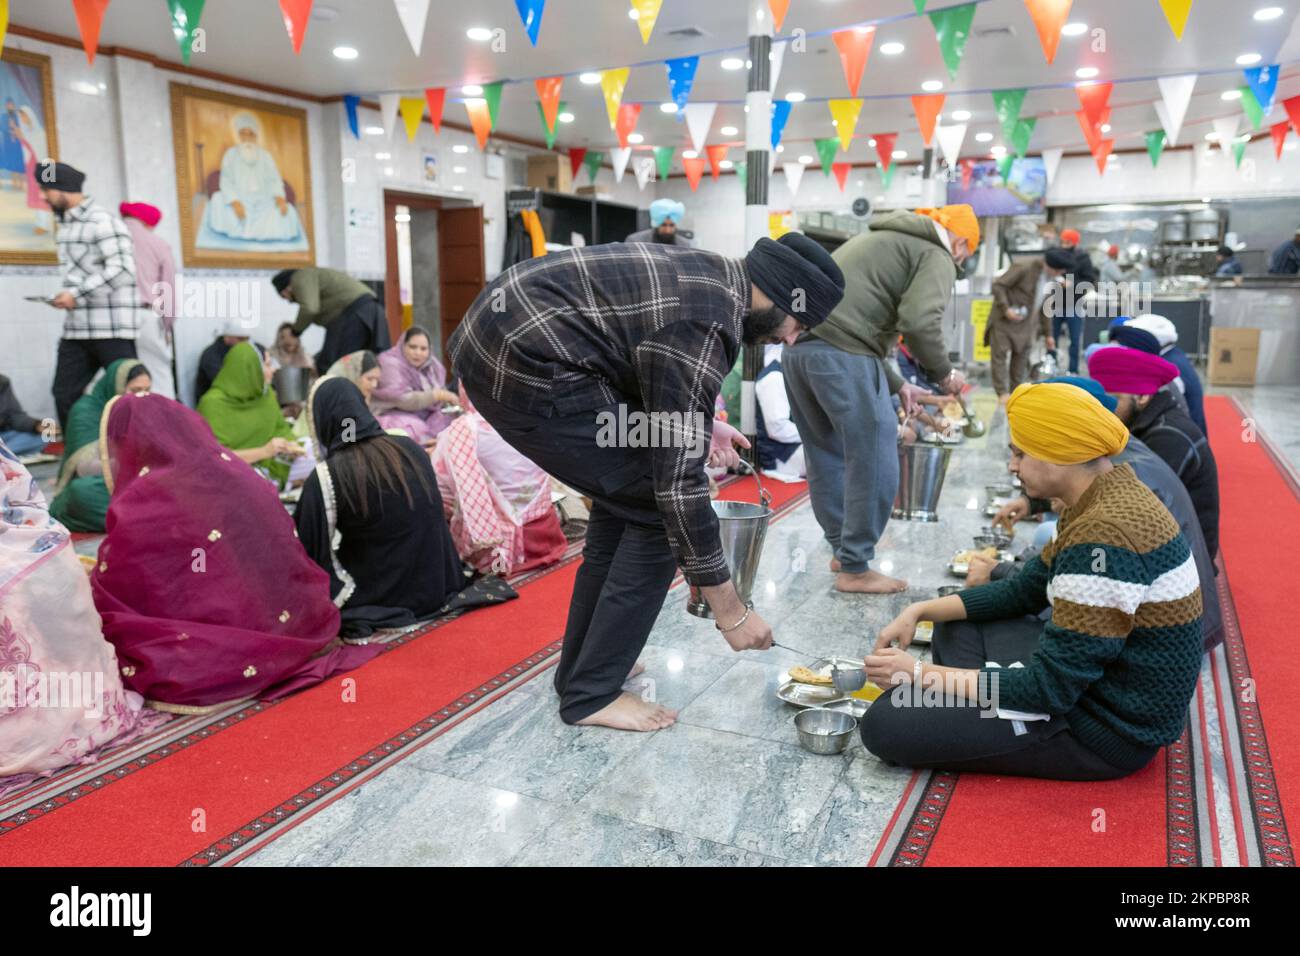 LANGAR. Volunteers at a Sikh temple distribute vegetarian food to worshippers and visitors. At a temple in Richmond Hill, Queens, New York City. Stock Photo